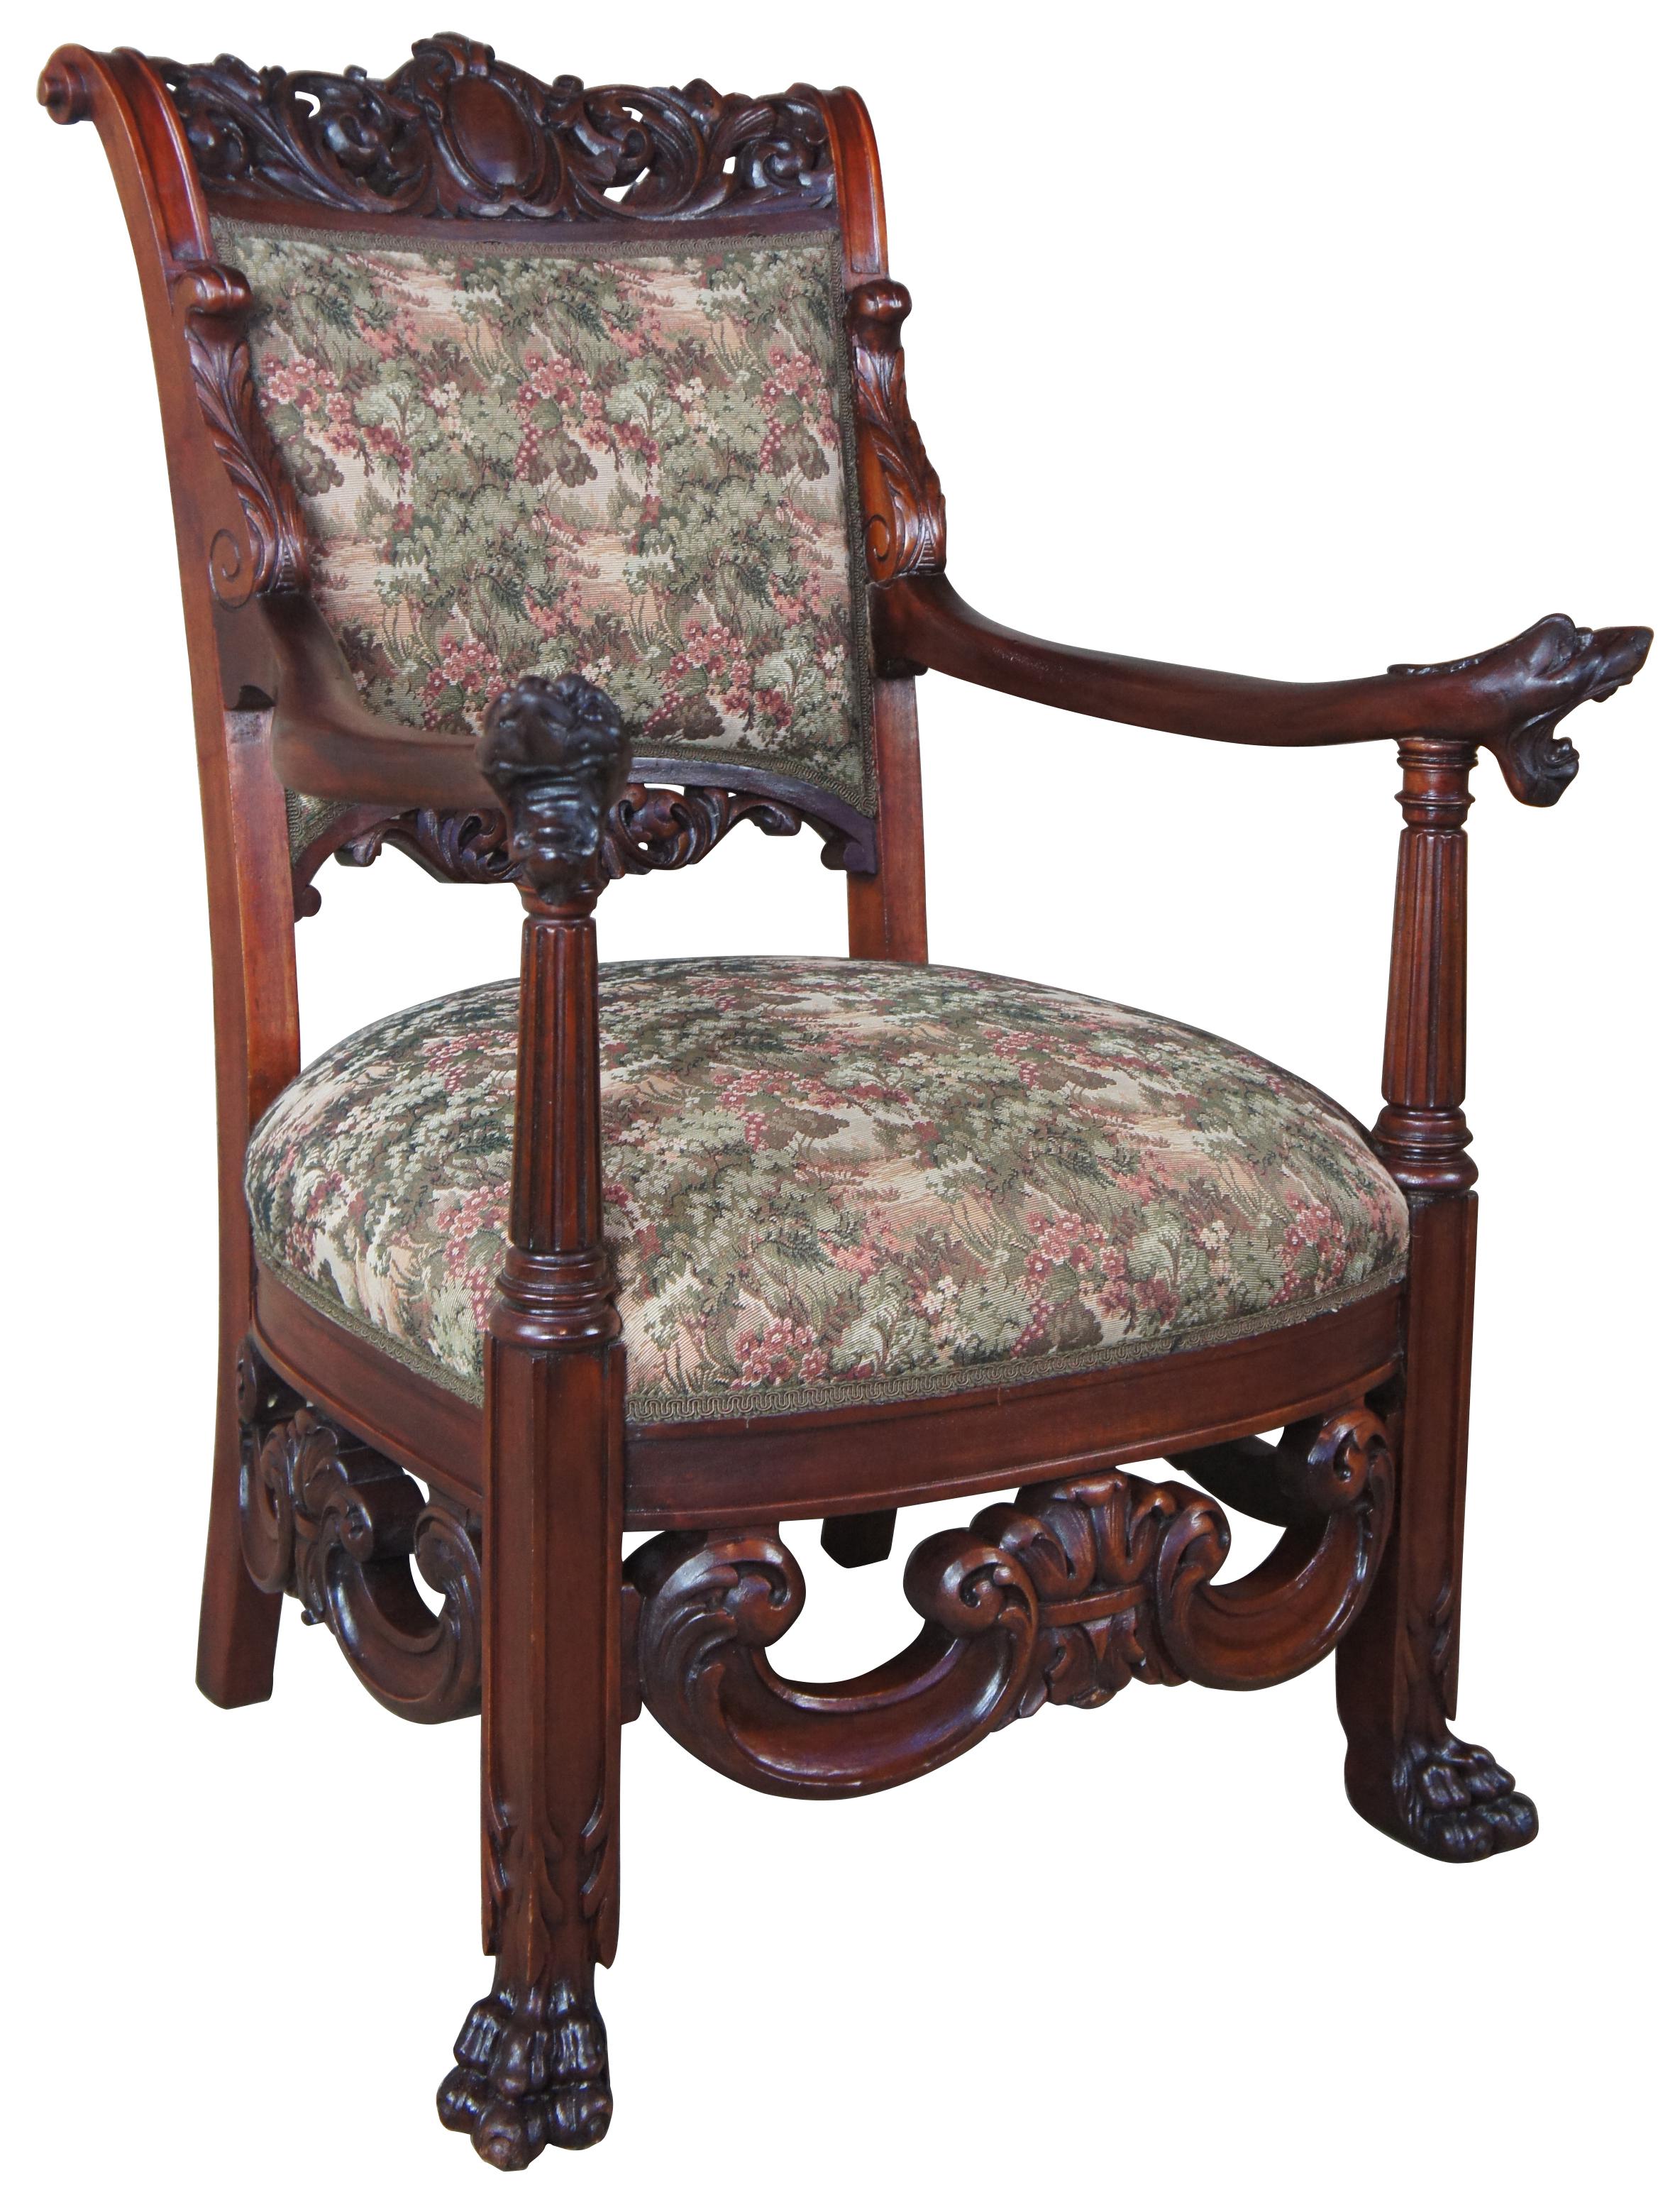 Mid-19th century continental armchair. Made from mahogany with scrolled and carved back leading to figural arms featuring dog head carvings. Each arm is supported by a fluted and tapered column leading to paw feet. Chair is covered with an Aubusson